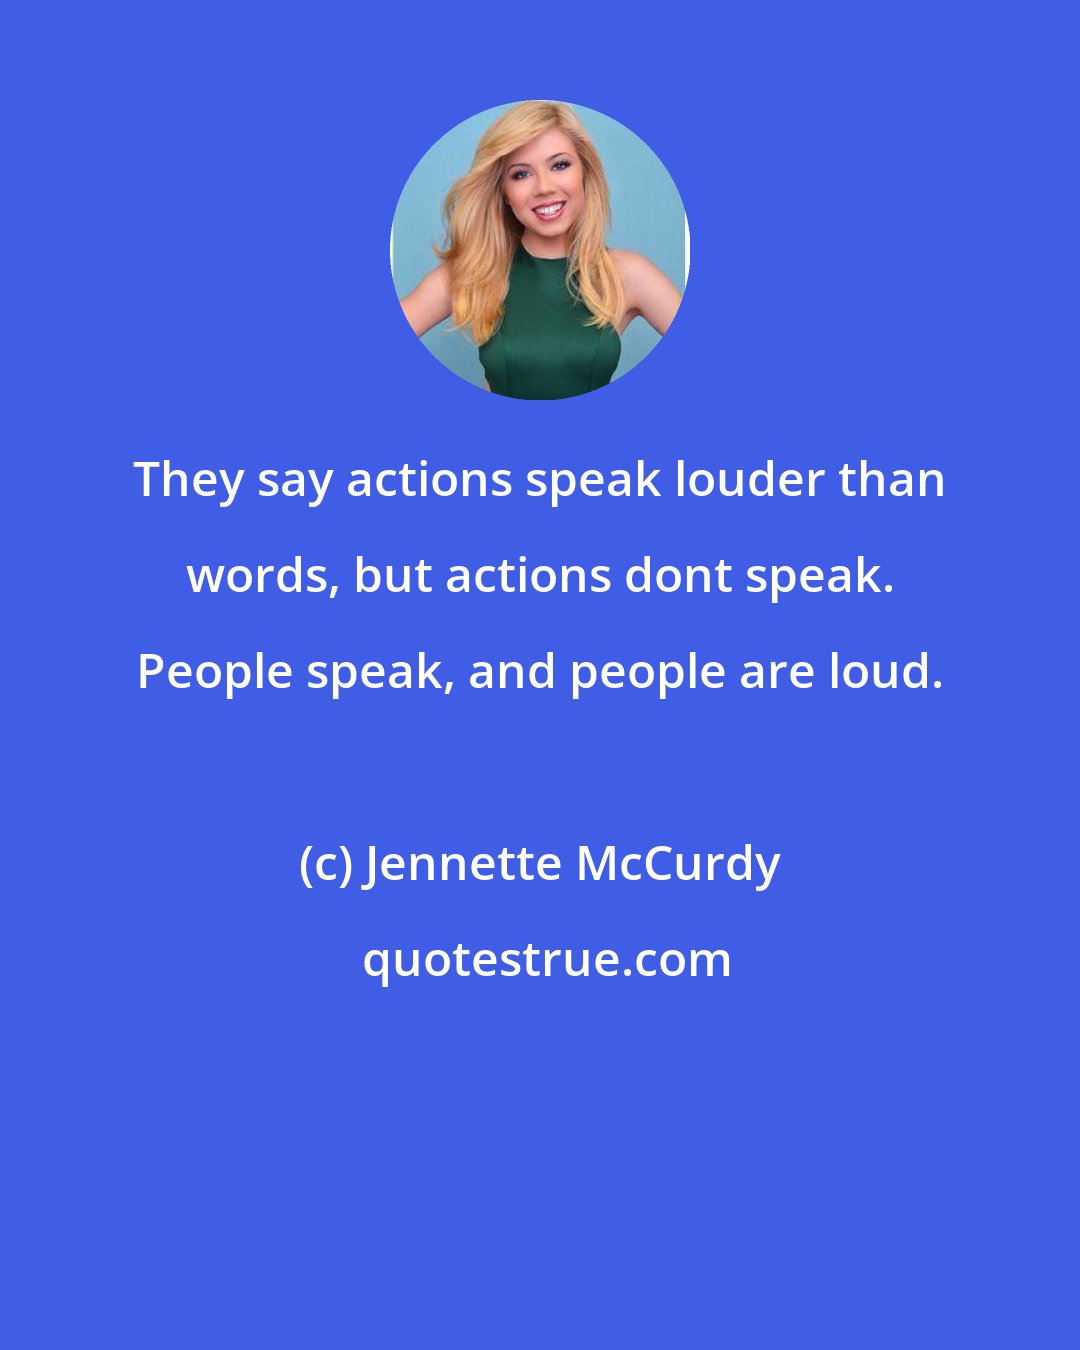 Jennette McCurdy: They say actions speak louder than words, but actions dont speak. People speak, and people are loud.